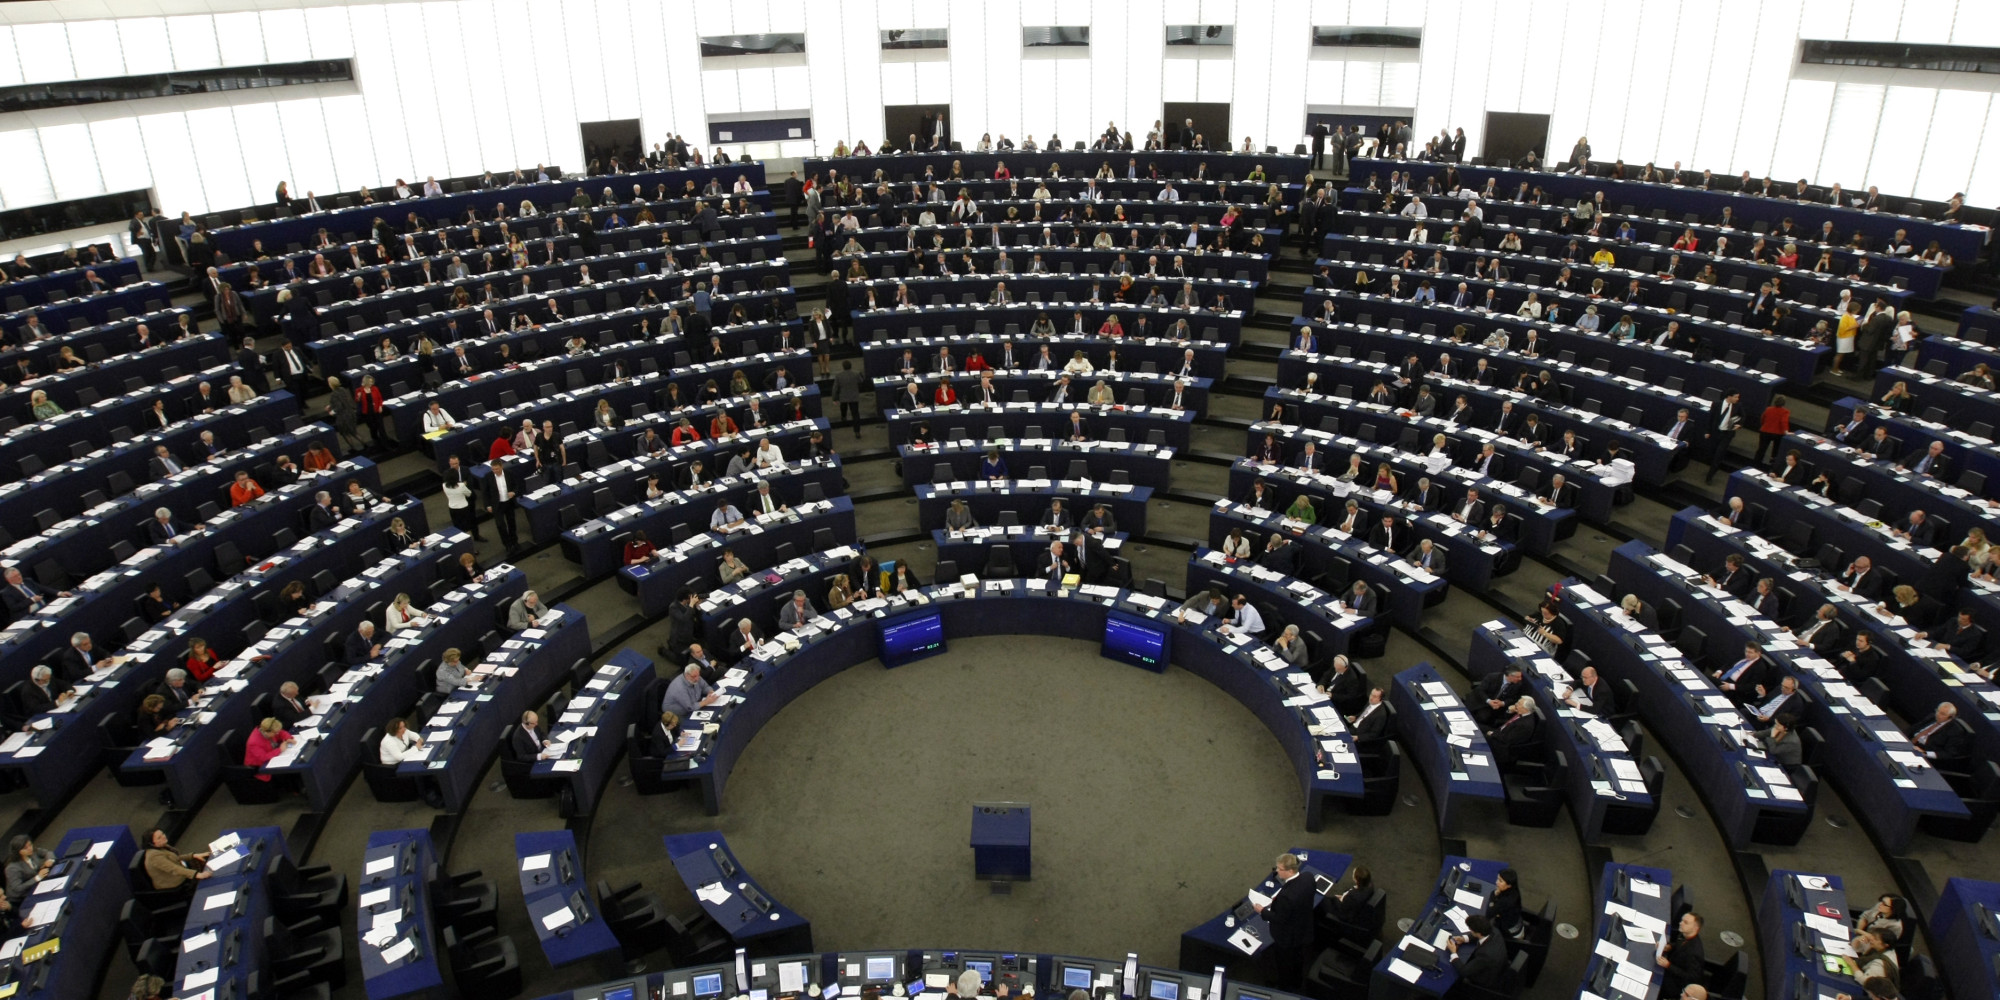 The European Parliament is pictured Wednesday April 16, 2014 in Strasbourg, eastern France.  The European  general elections in the 27 countries of the E.U will take place from May 22 to 25, 2014. (AP Photo/Christian Lutz)